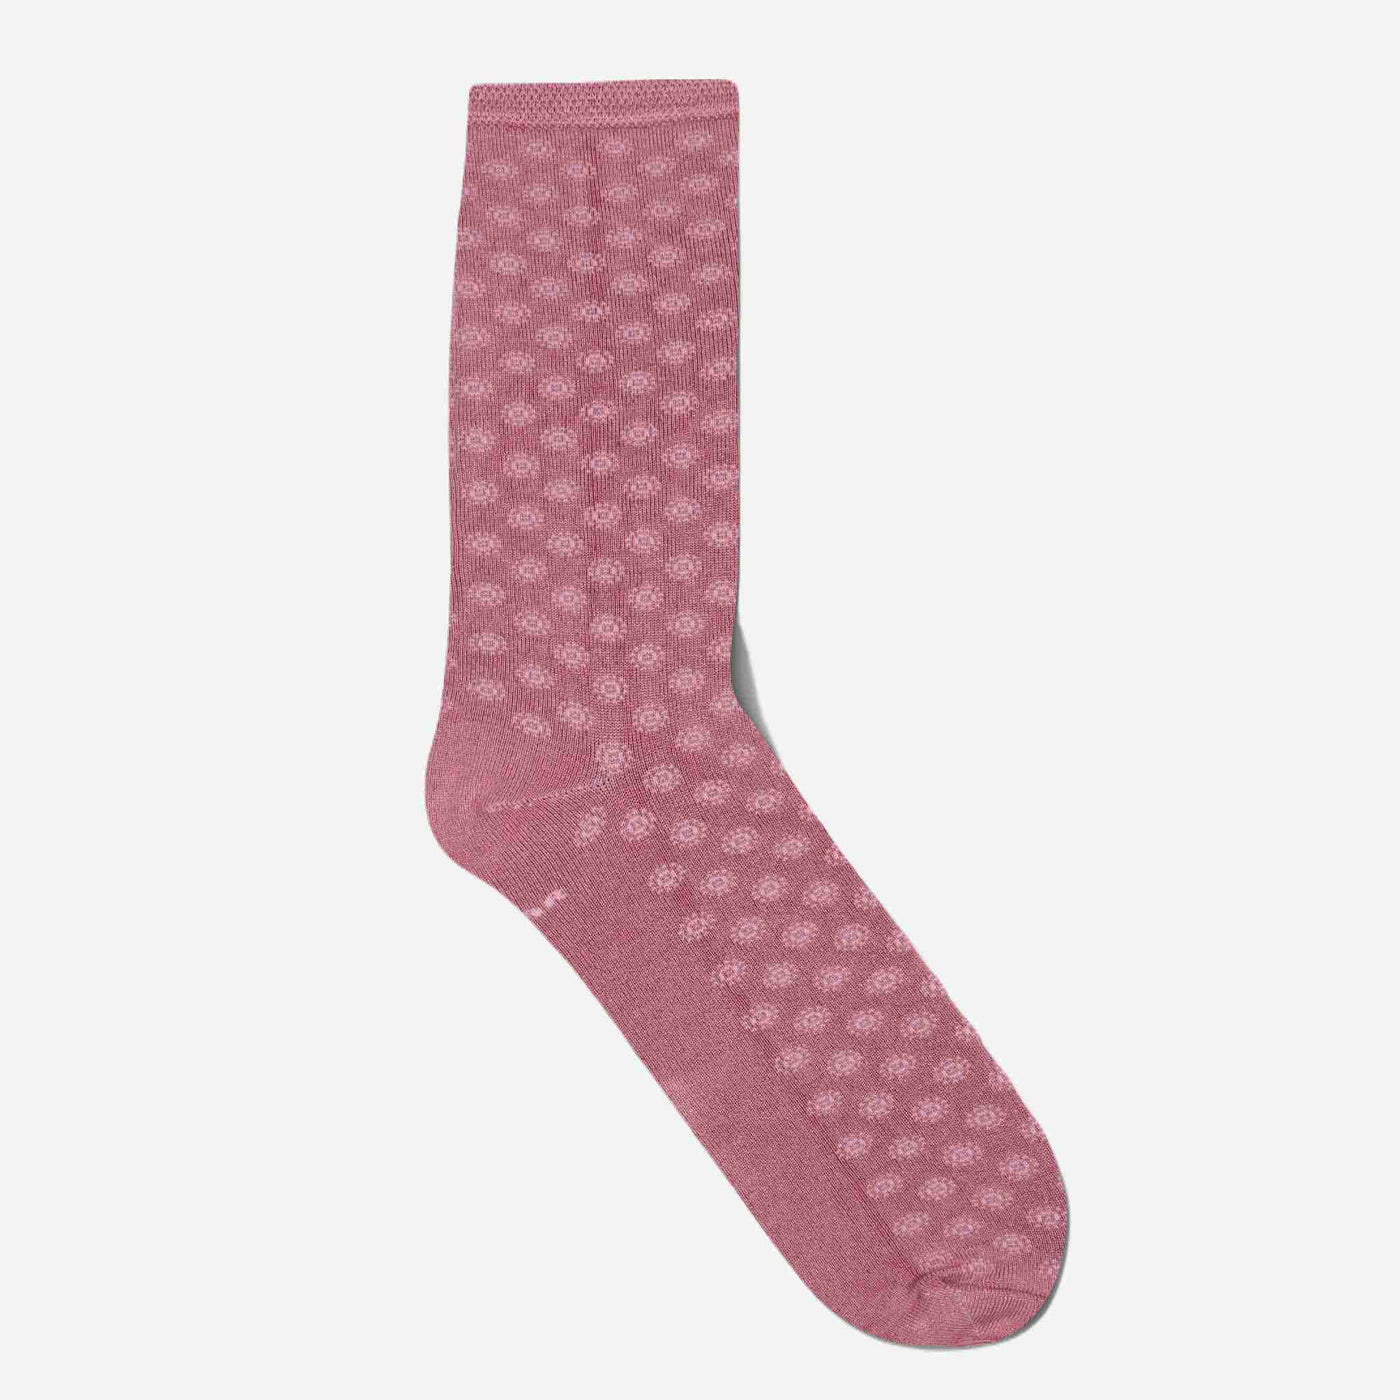 Womens pink socks with white dots - 5-pack